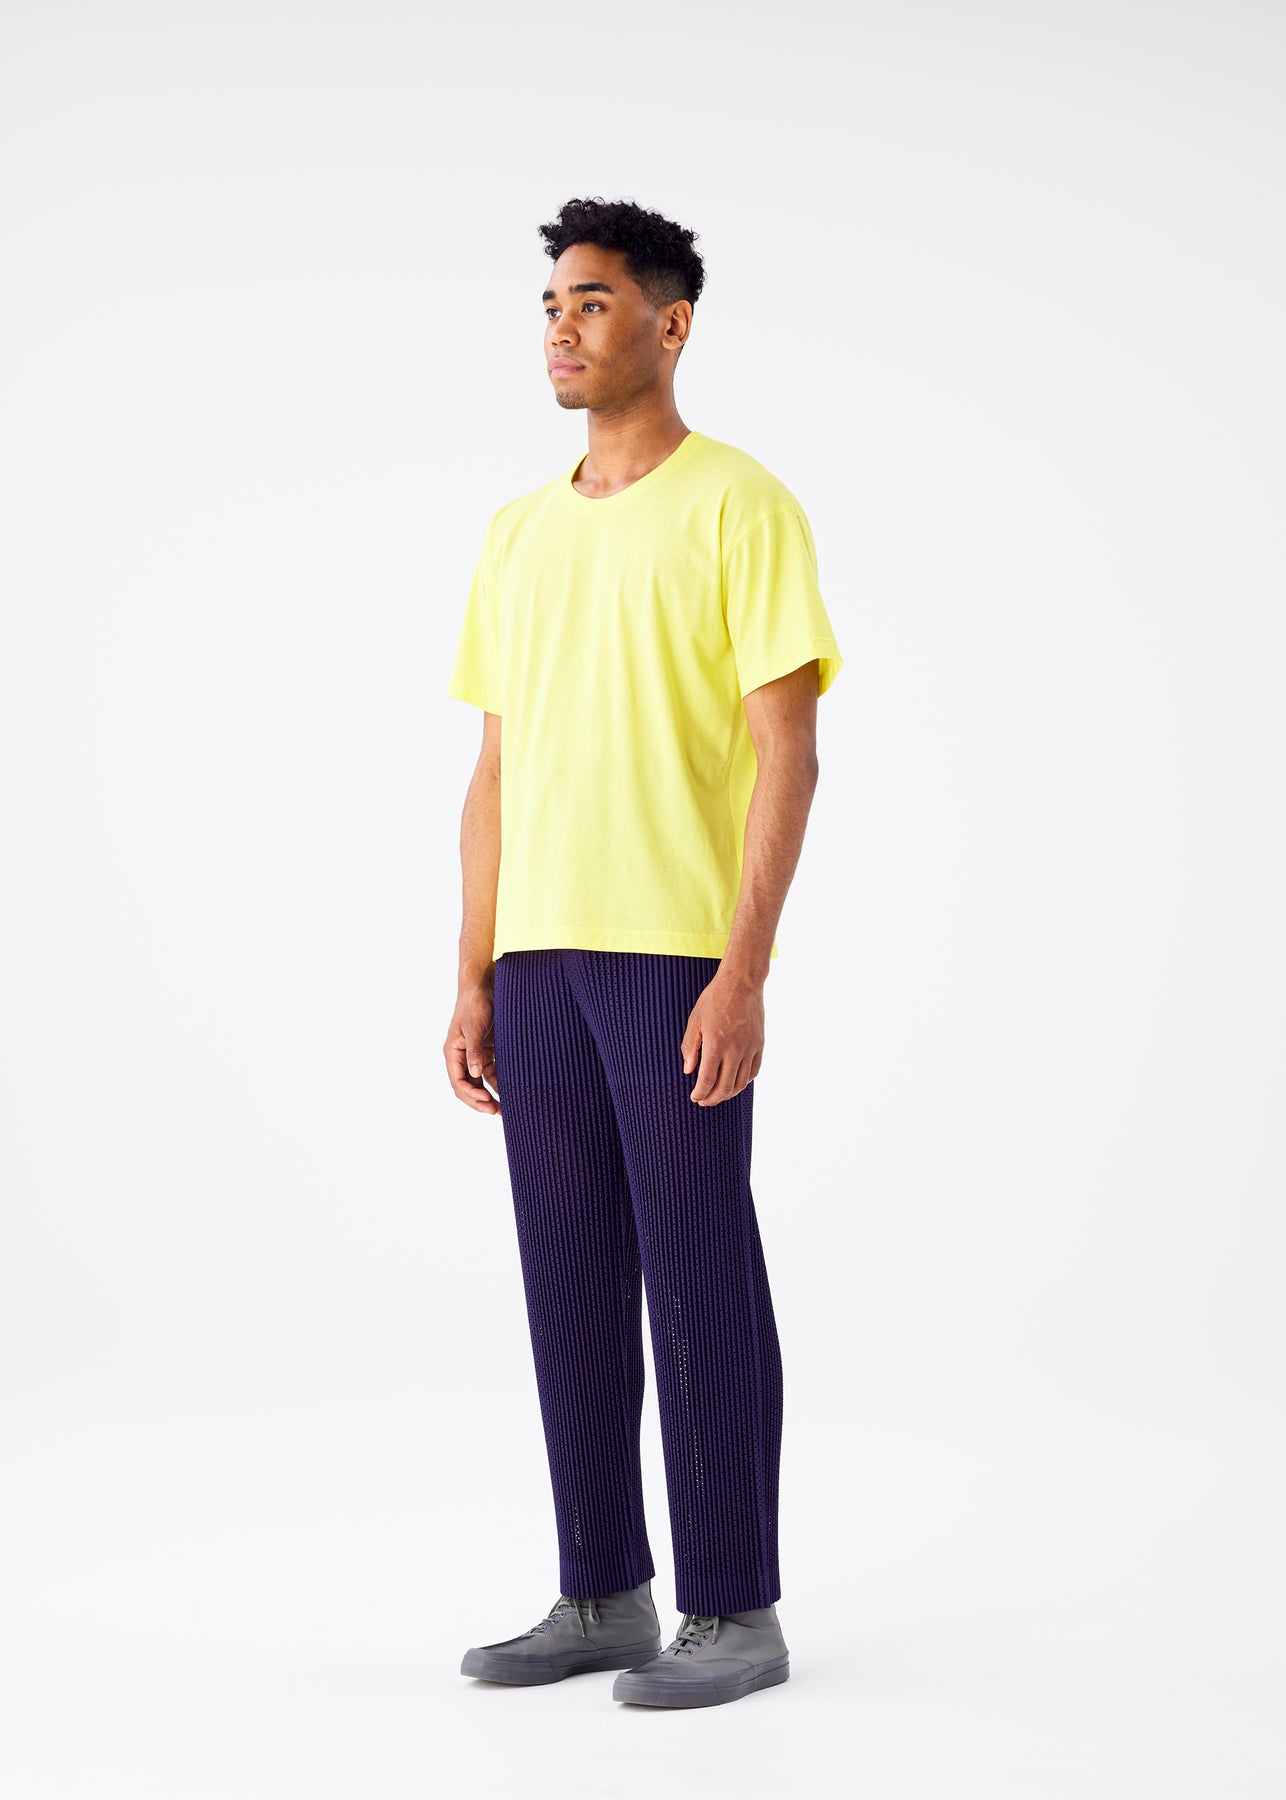 OUTER MESH PANTS | The official ISSEY MIYAKE ONLINE STORE | ISSEY